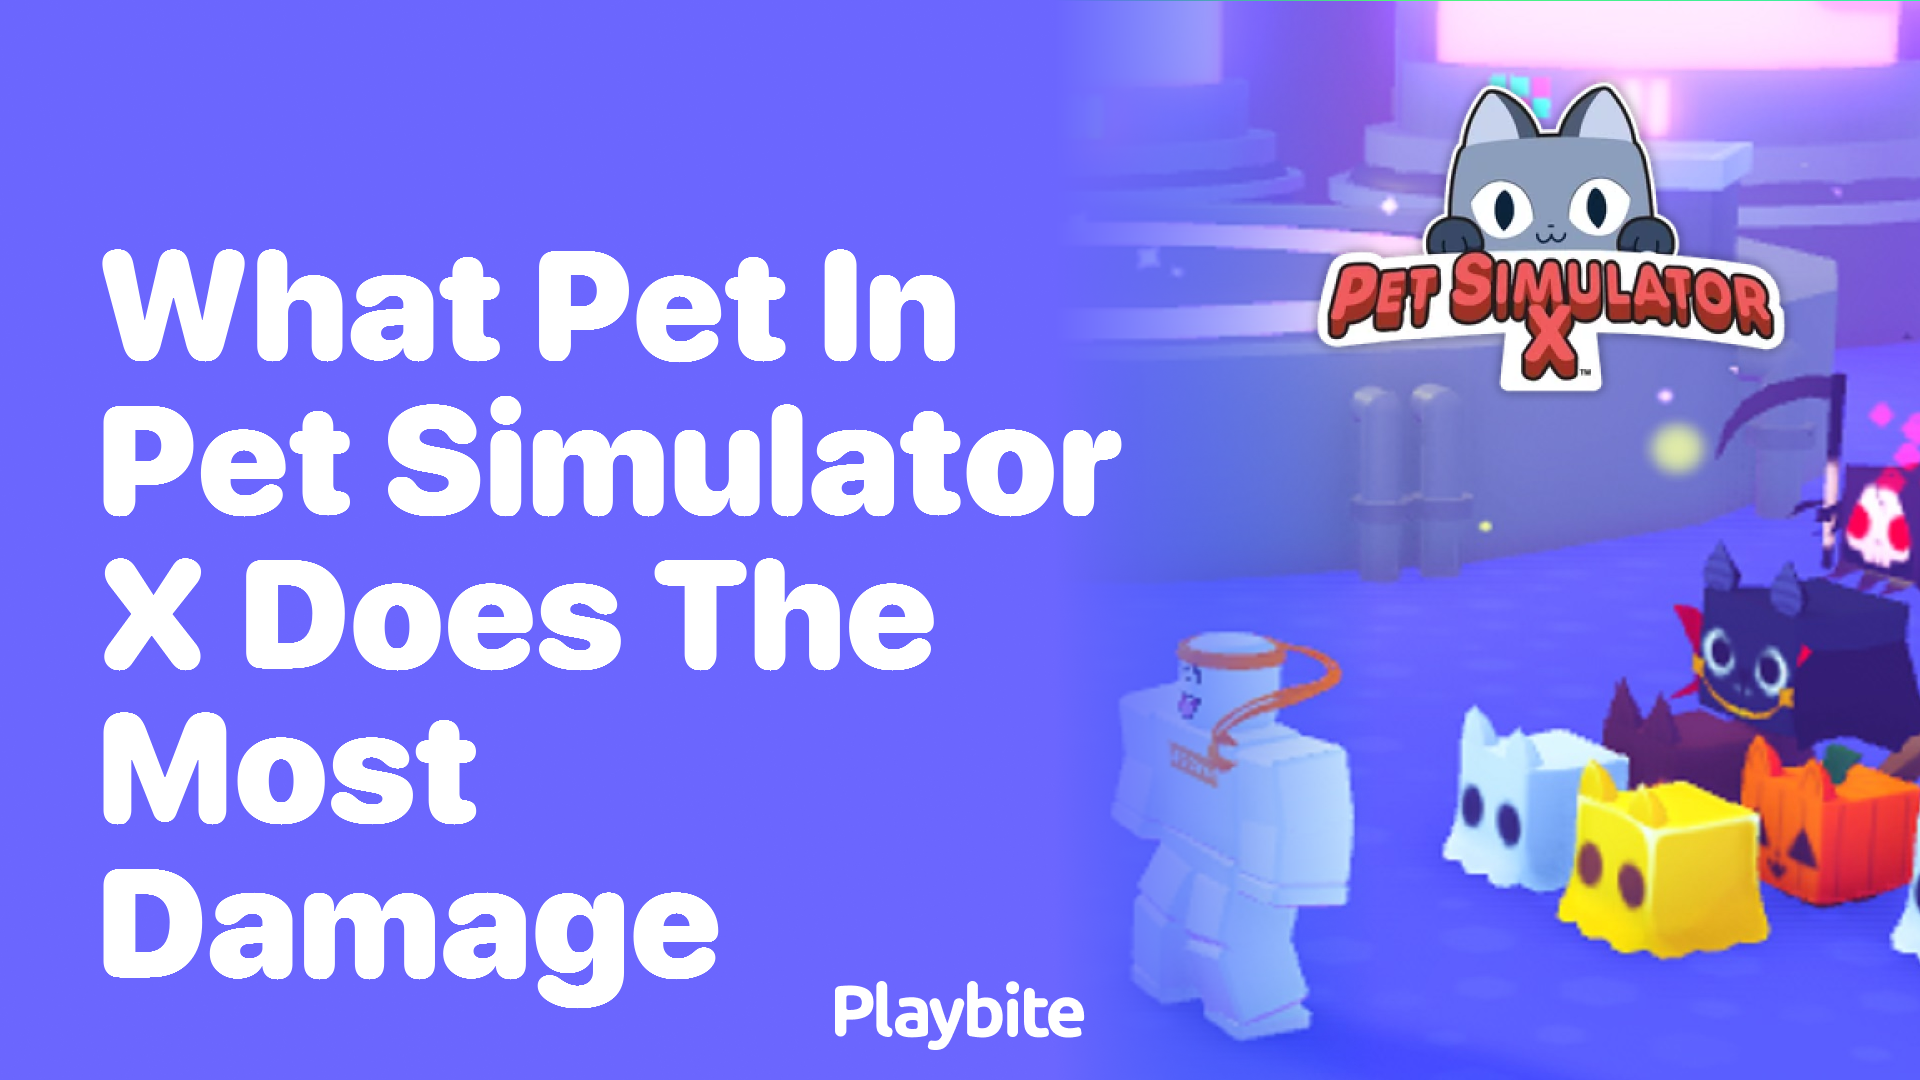 Discover the Pet That Deals the Most Damage in Pet Simulator X